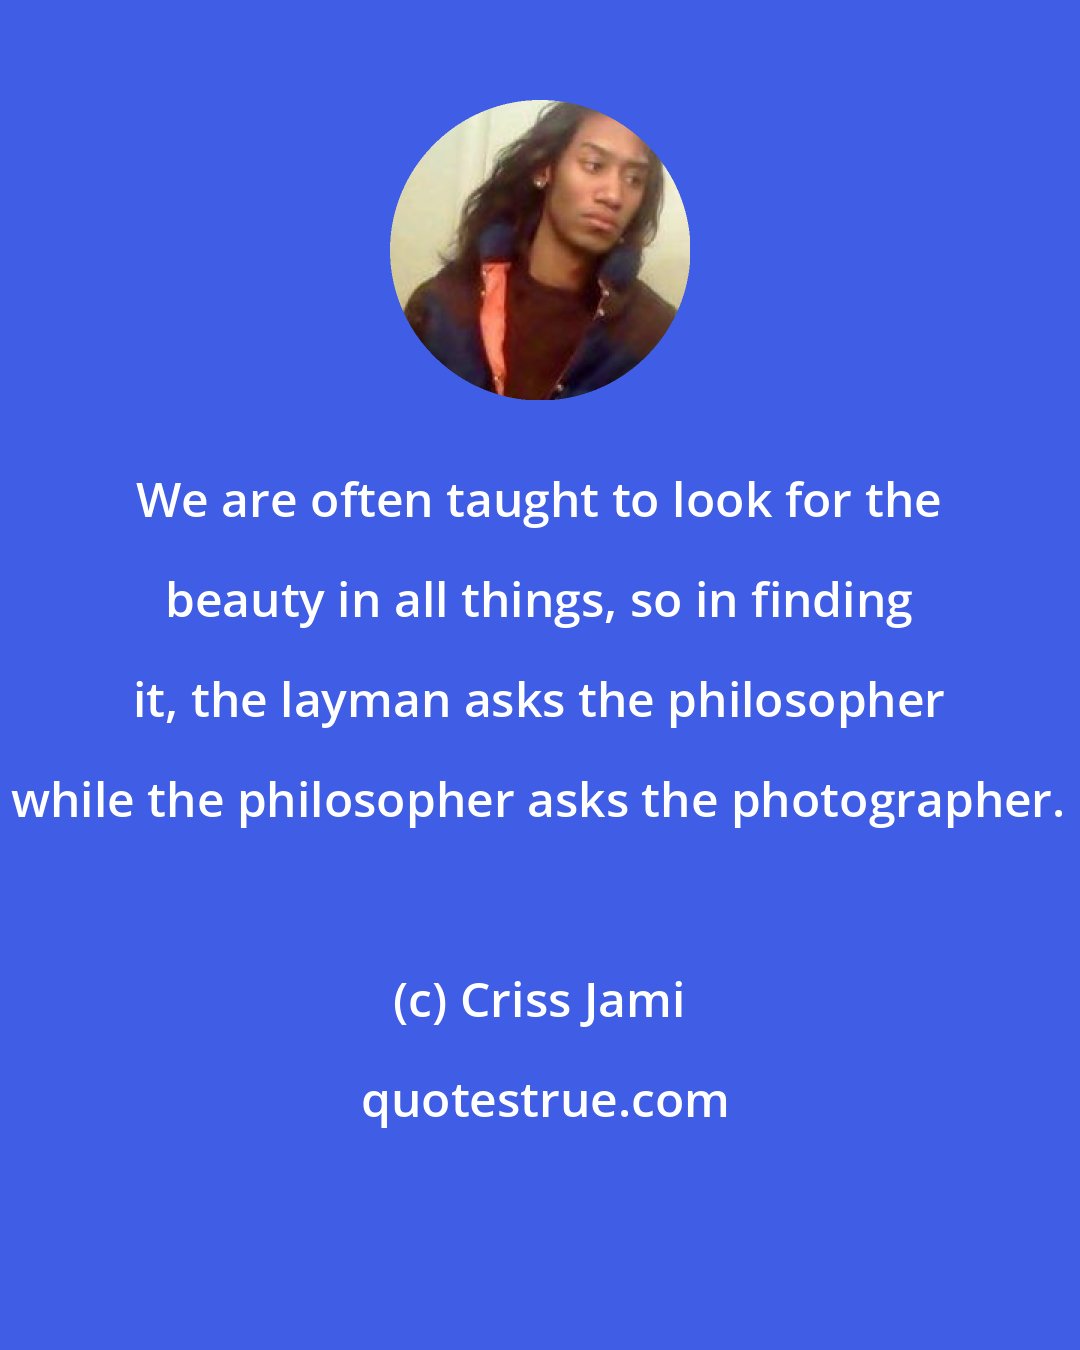 Criss Jami: We are often taught to look for the beauty in all things, so in finding it, the layman asks the philosopher while the philosopher asks the photographer.